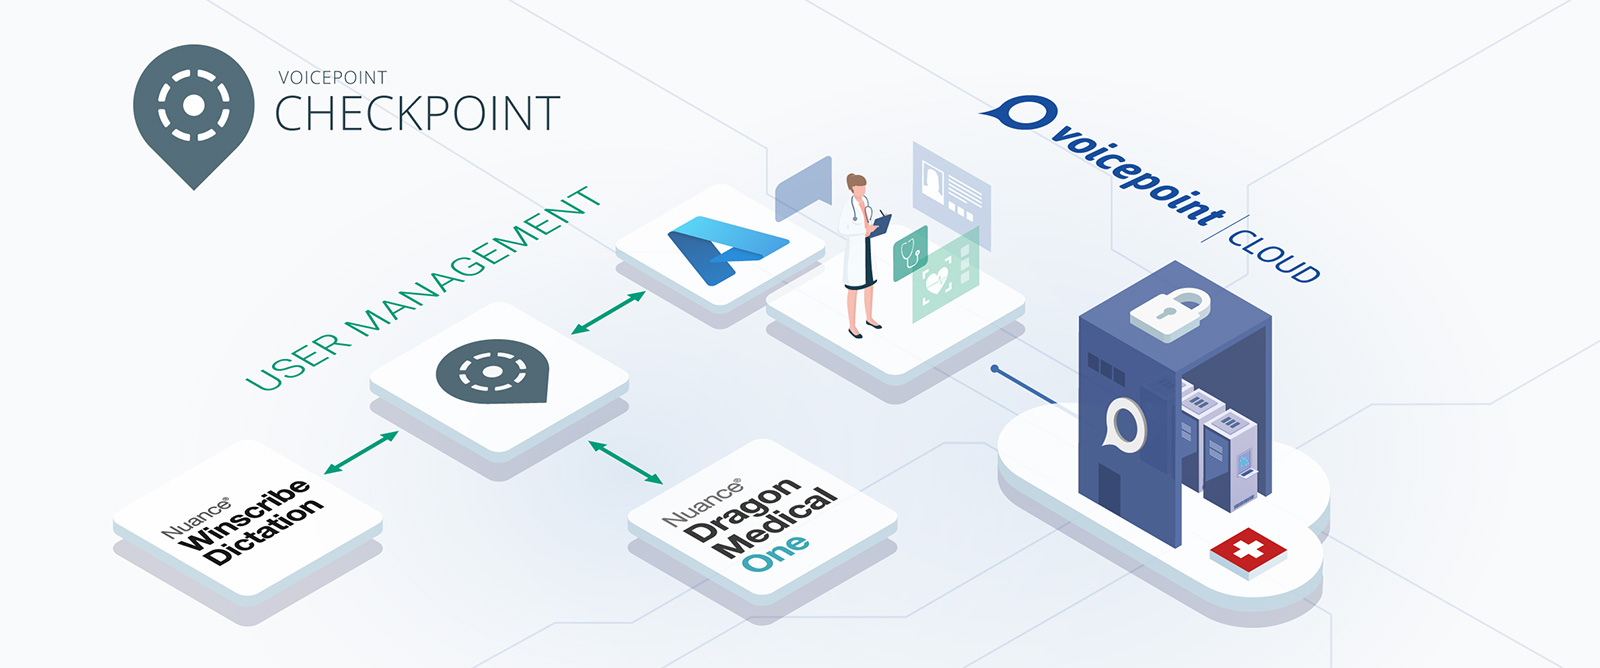 Voicepoint Checkpoint User Sync